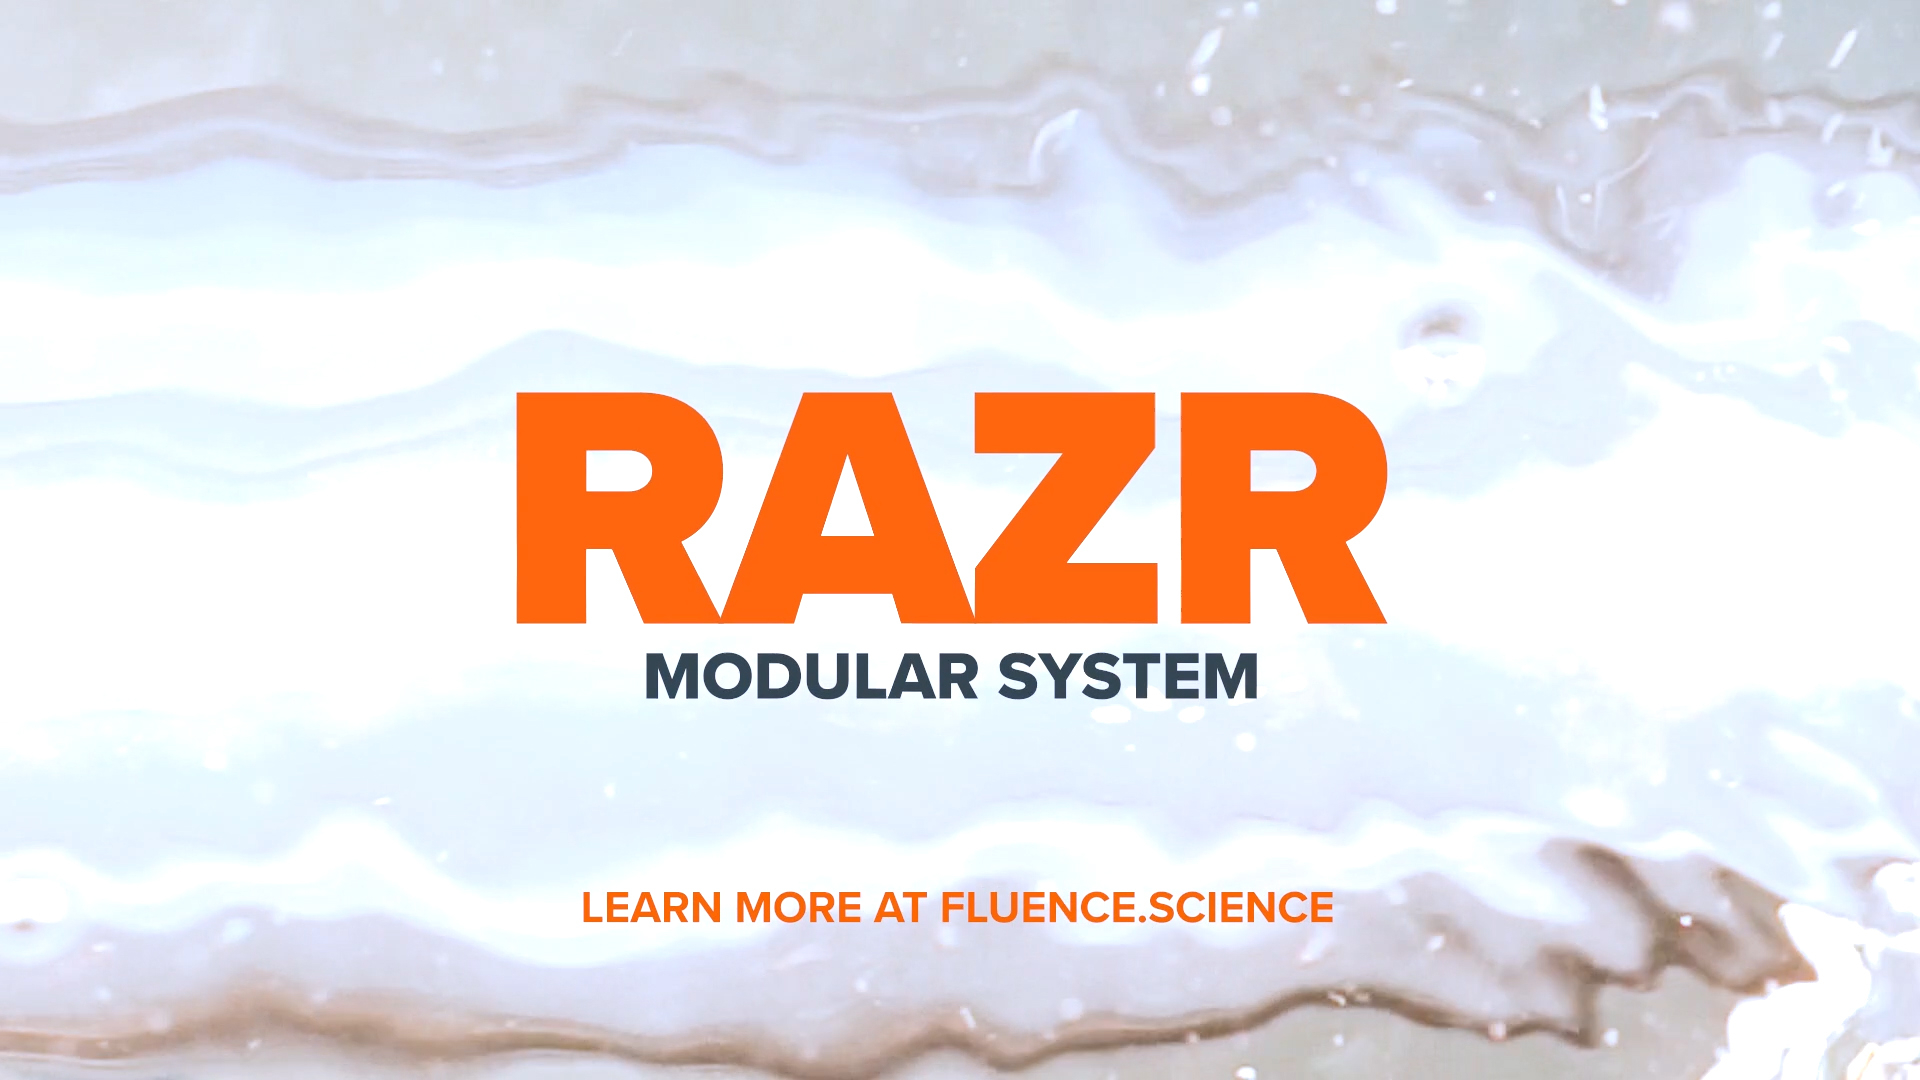 Fluence announced new product features for its award-winning RAZR Modular System, including additional system configurations, seven total spectral offerings and an IP67 waterproof model that is easy to clean and operates seamlessly alongside irrigation systems.